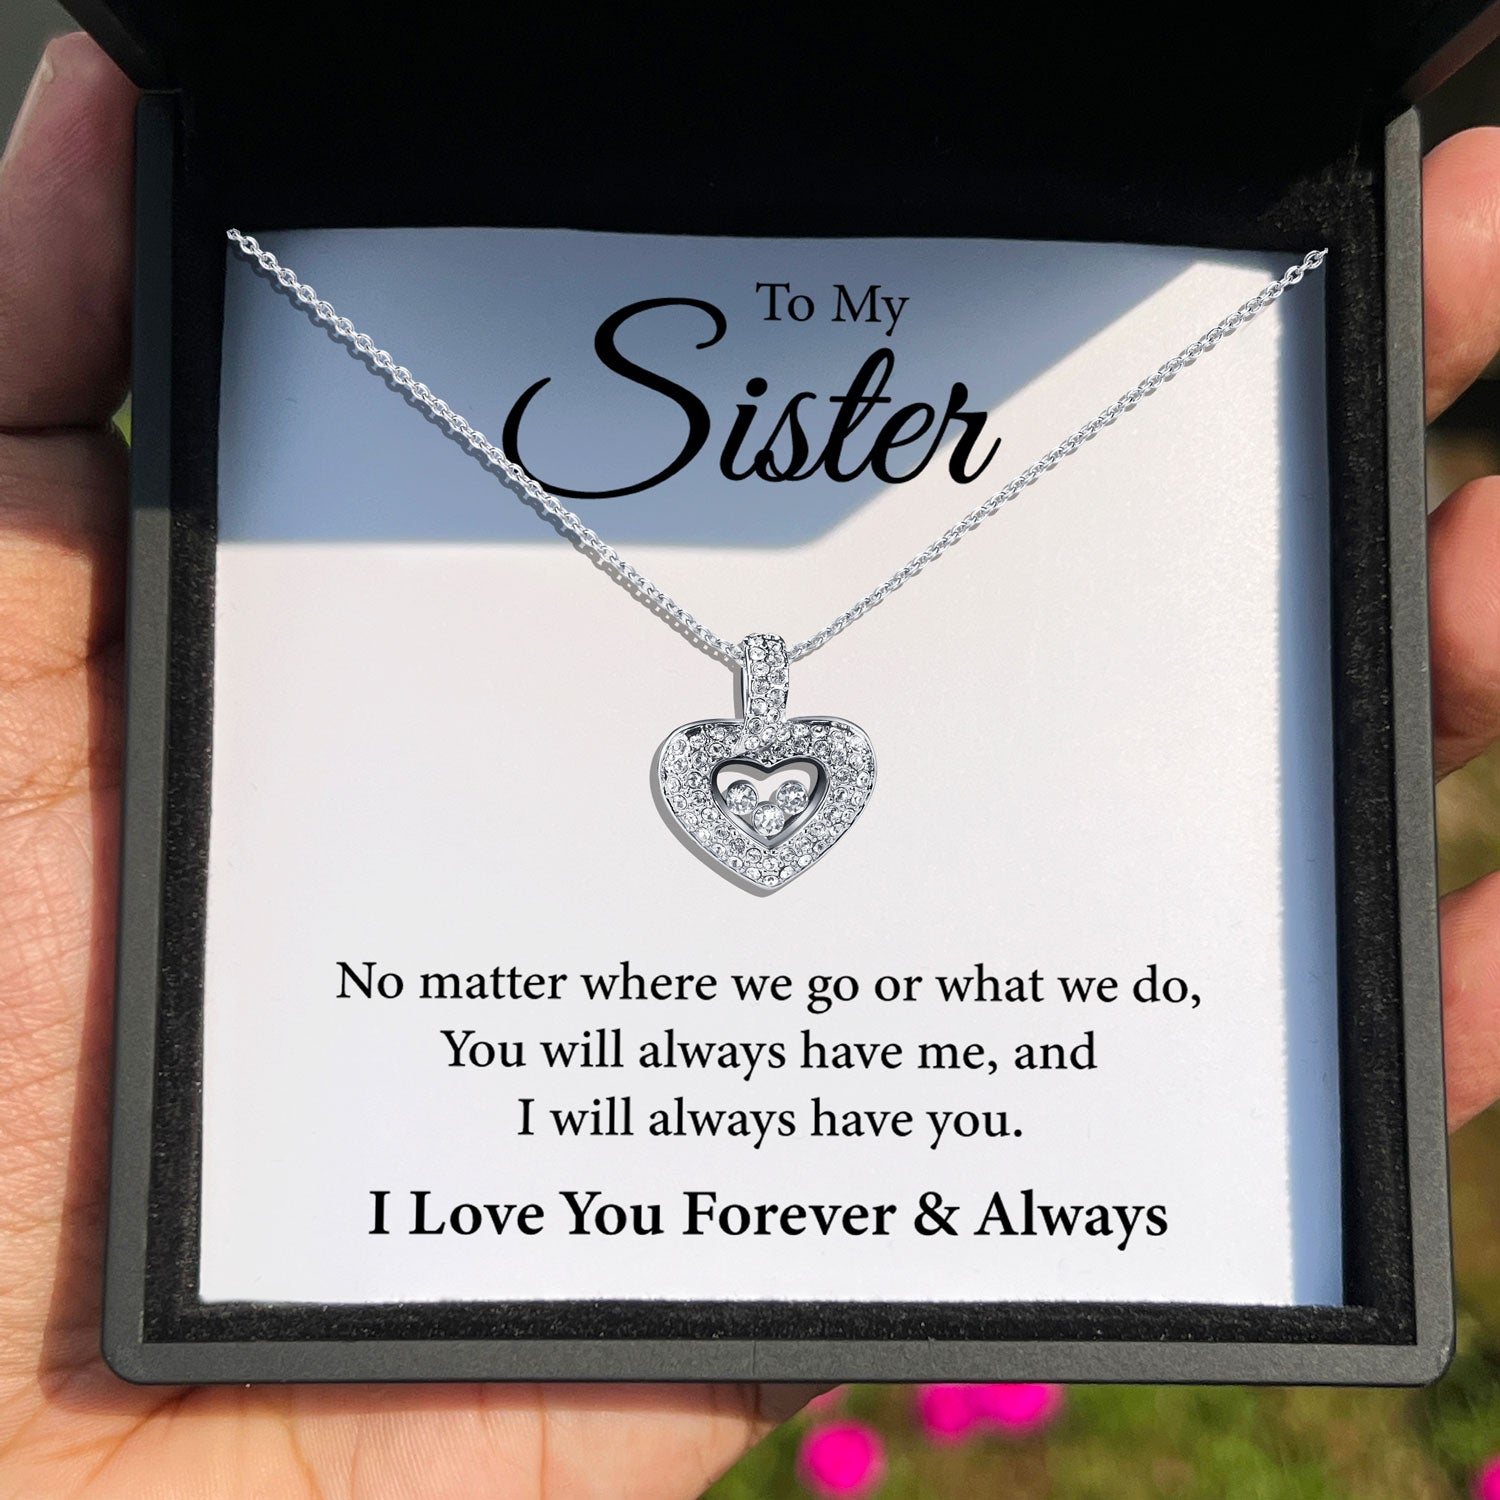 To My Sister - You Will Always Have Me - Tryndi Floating Heart Necklace